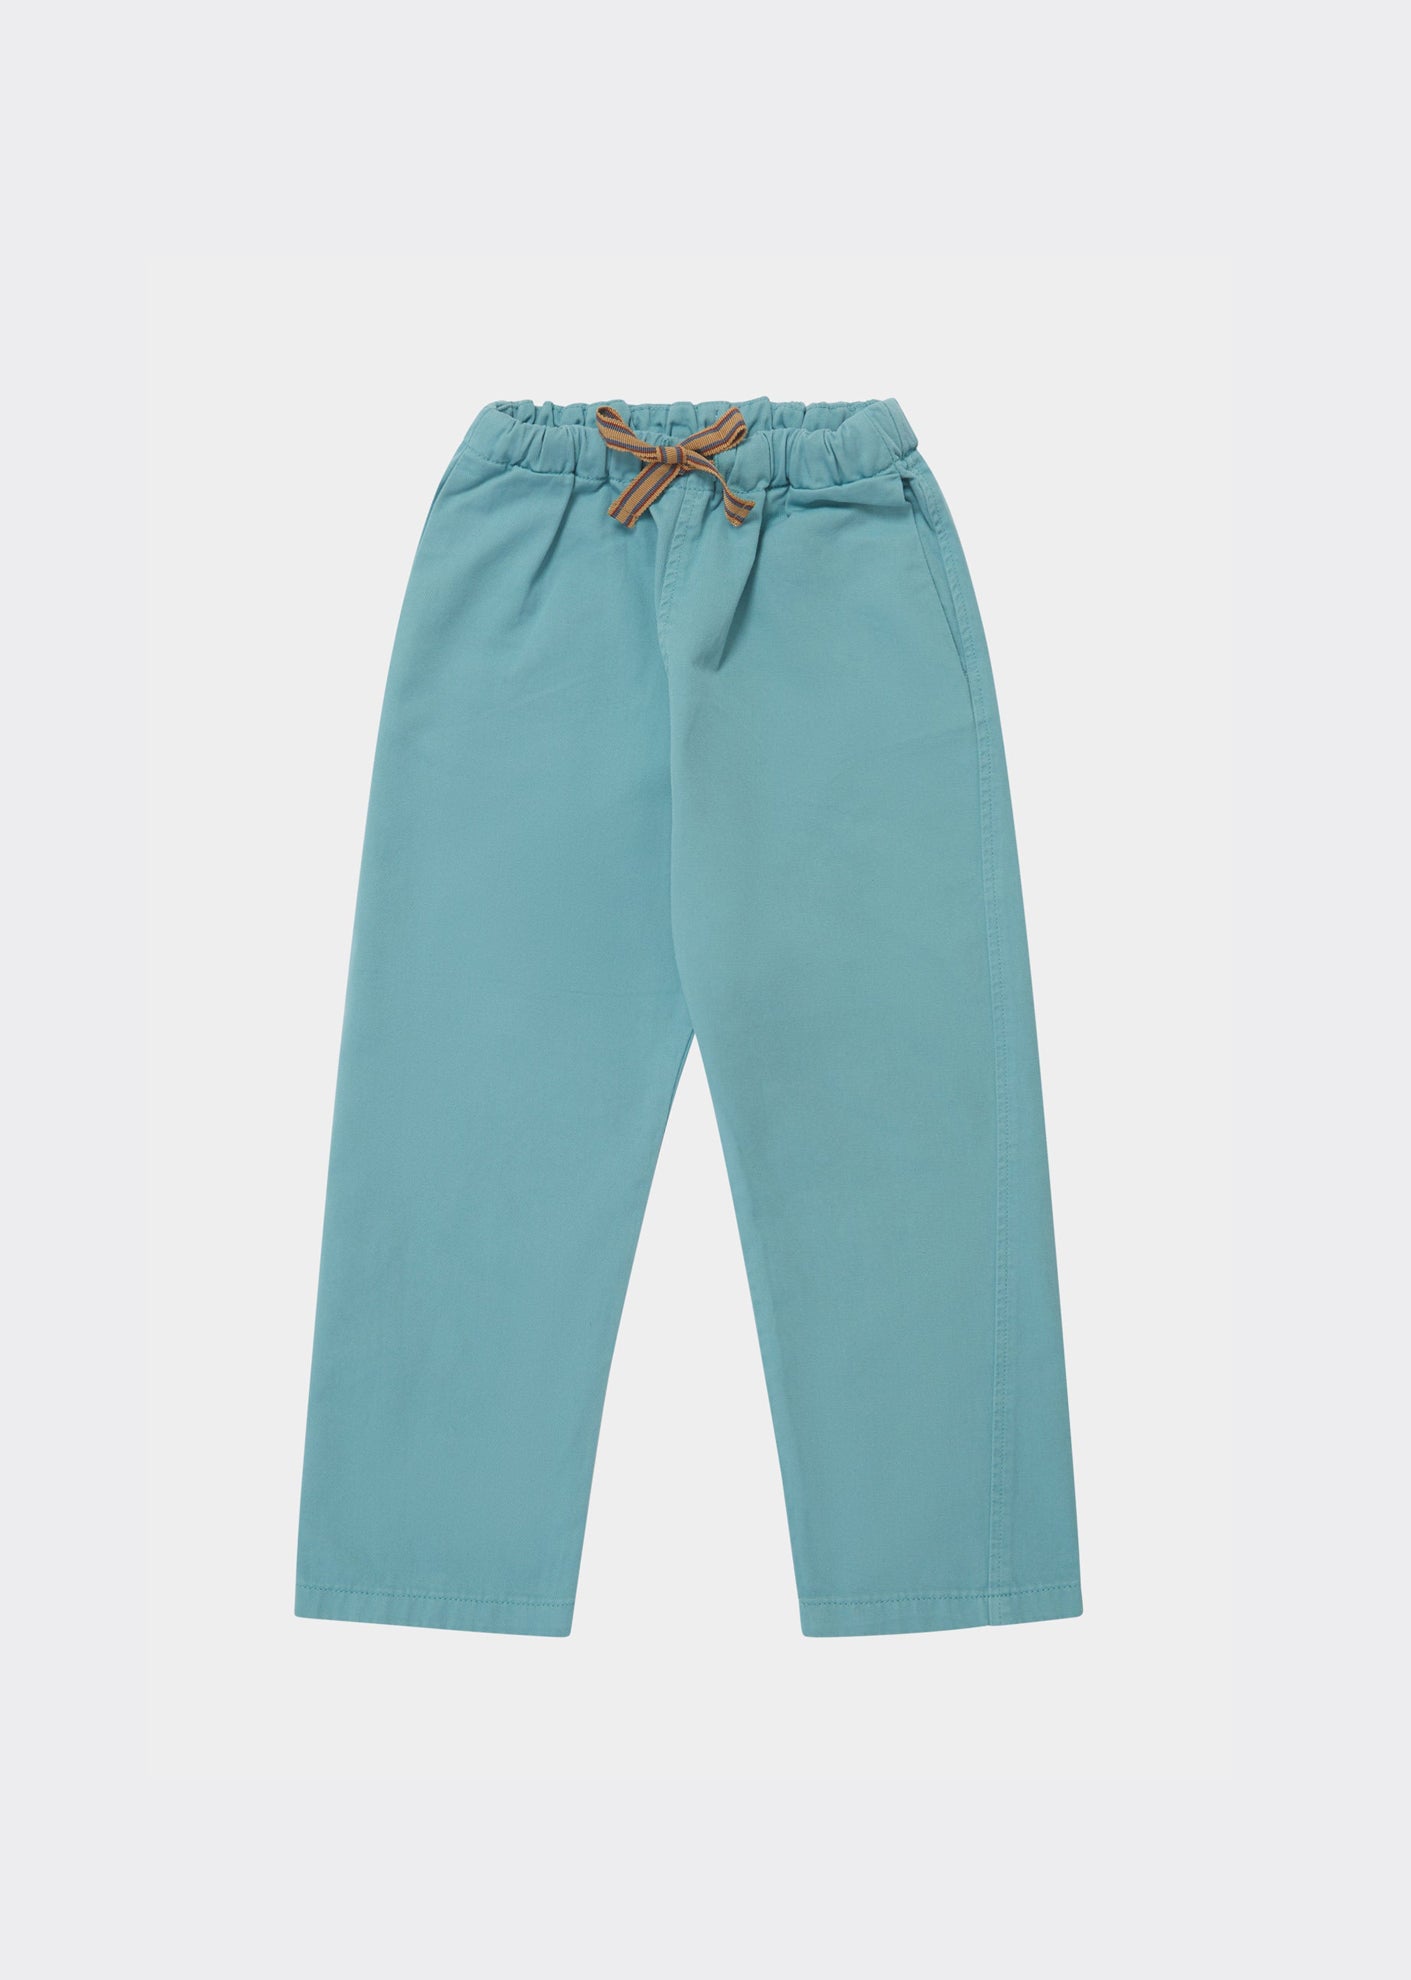 ERICA TROUSER - TURQUOISE TWILL